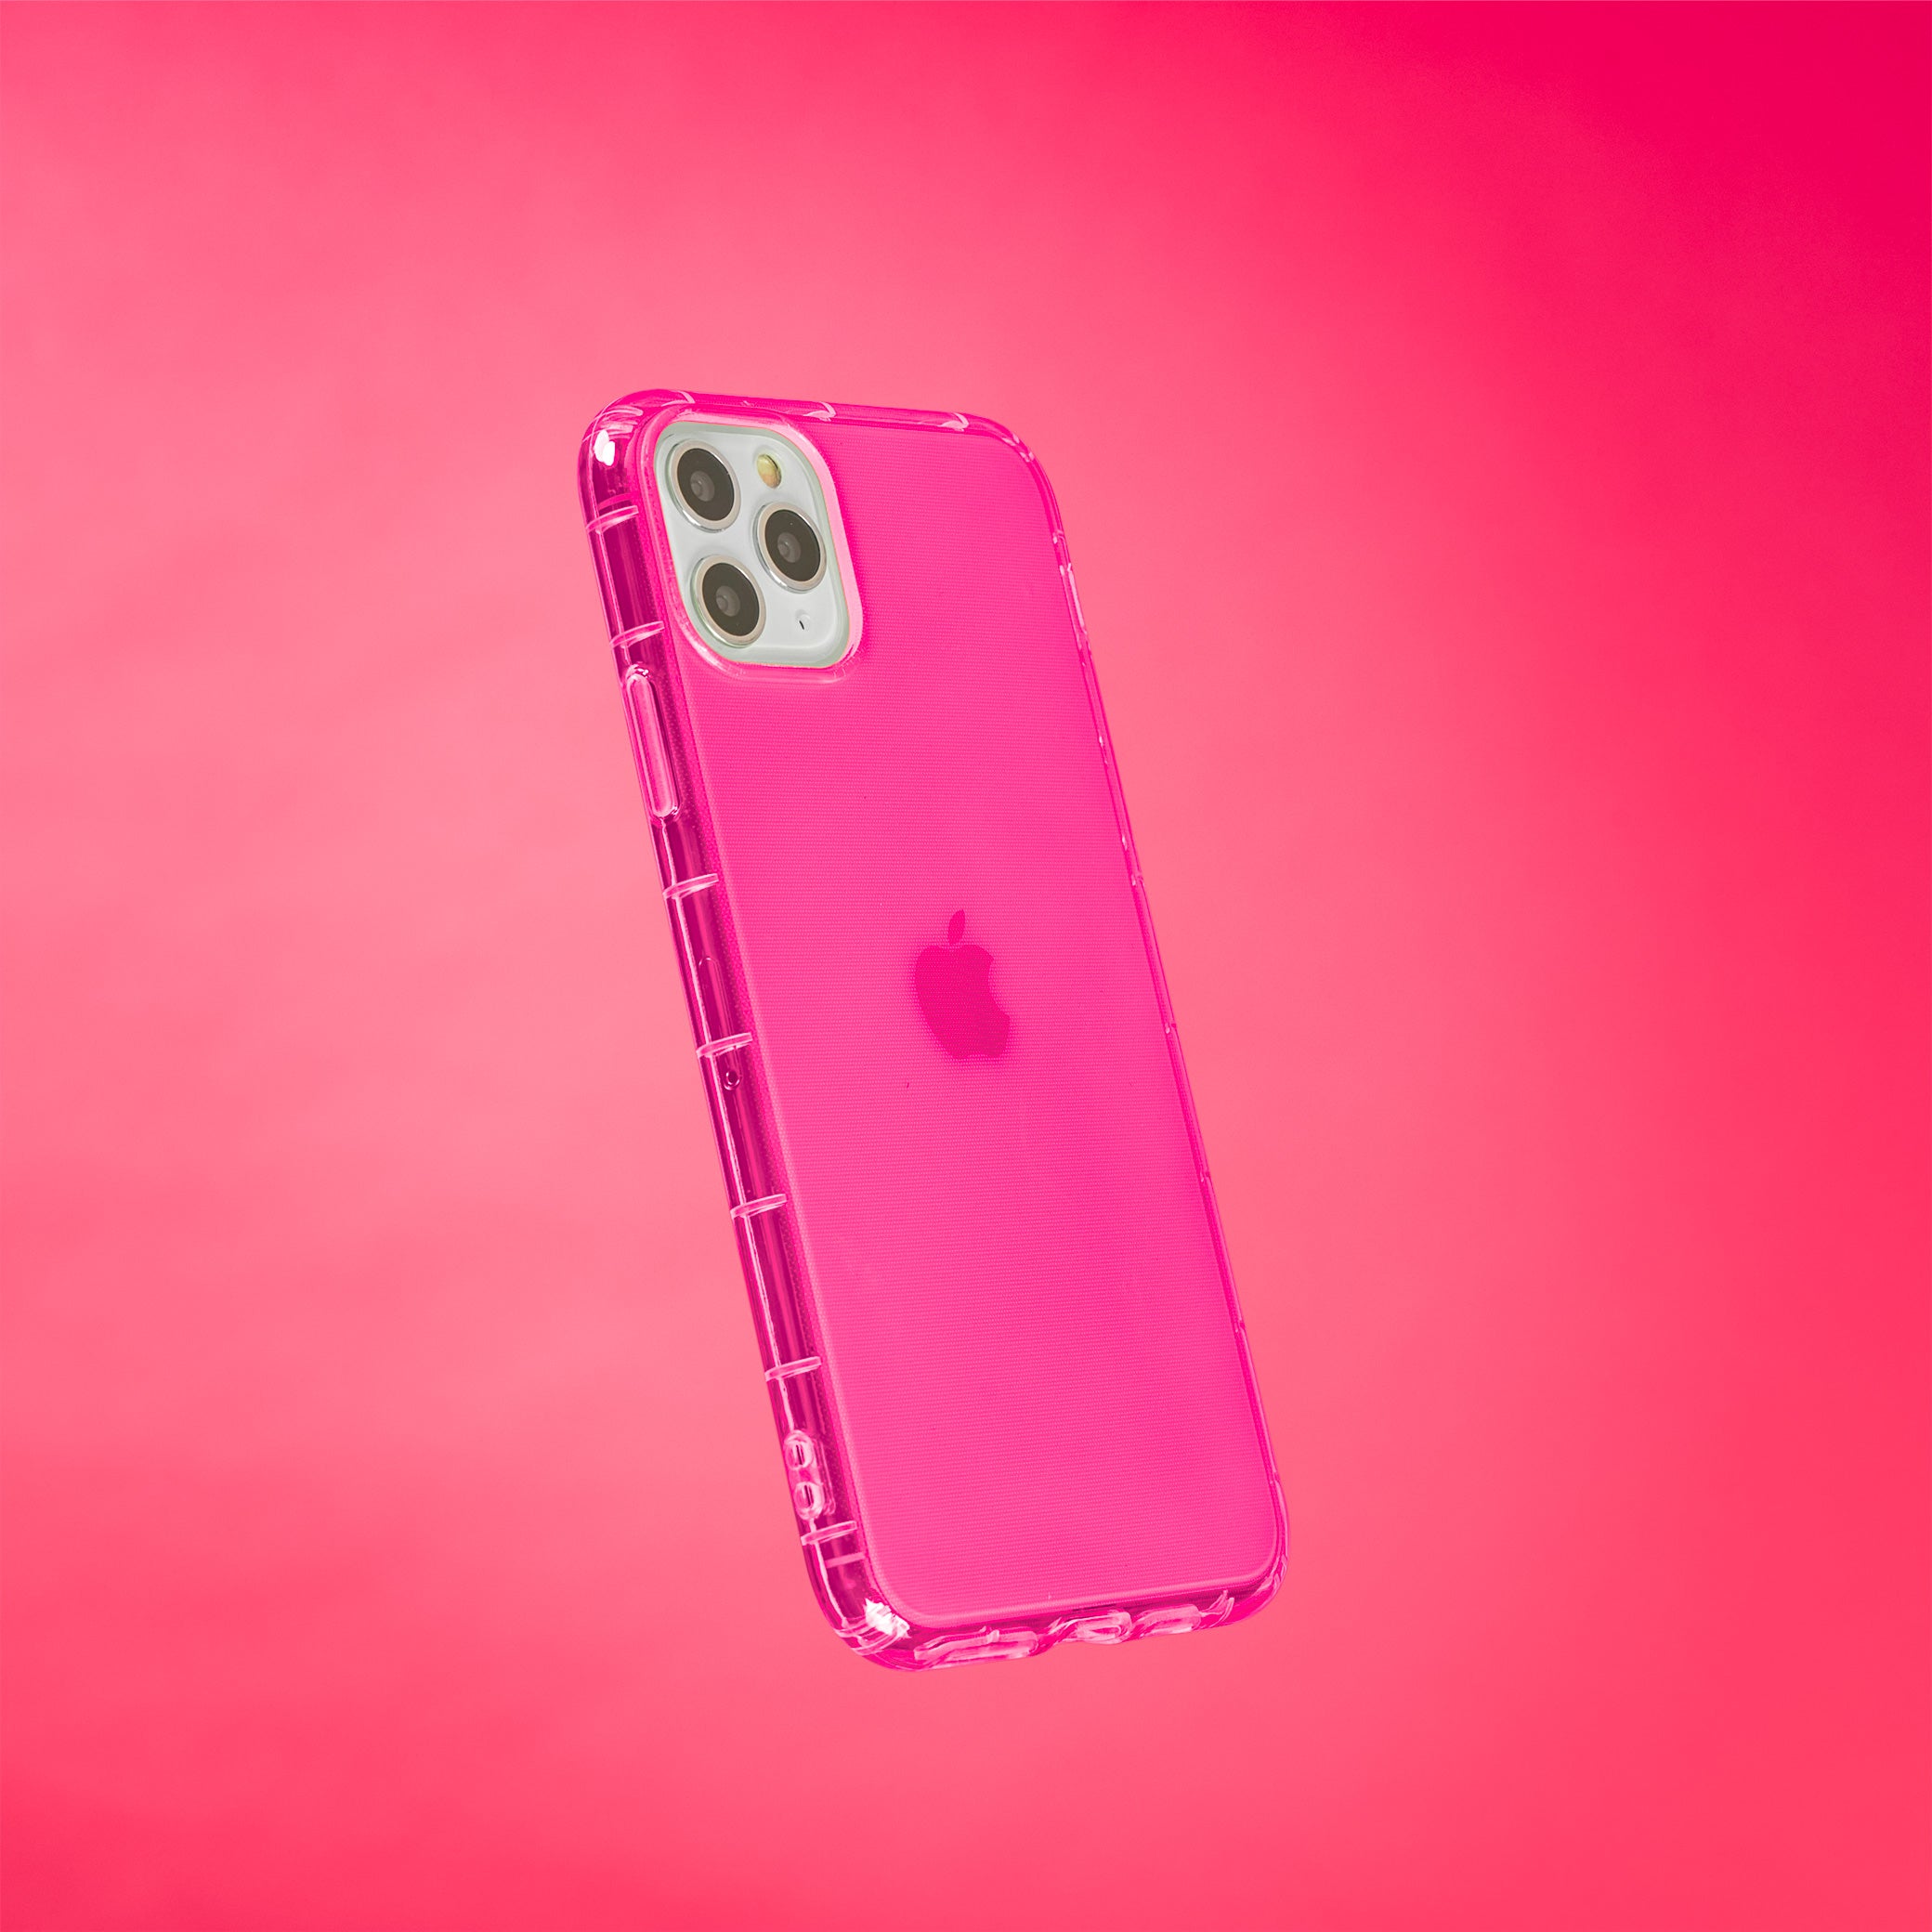 Highlighter Case for iPhone 11 Pro Max - Eye-Catching Hot Pink